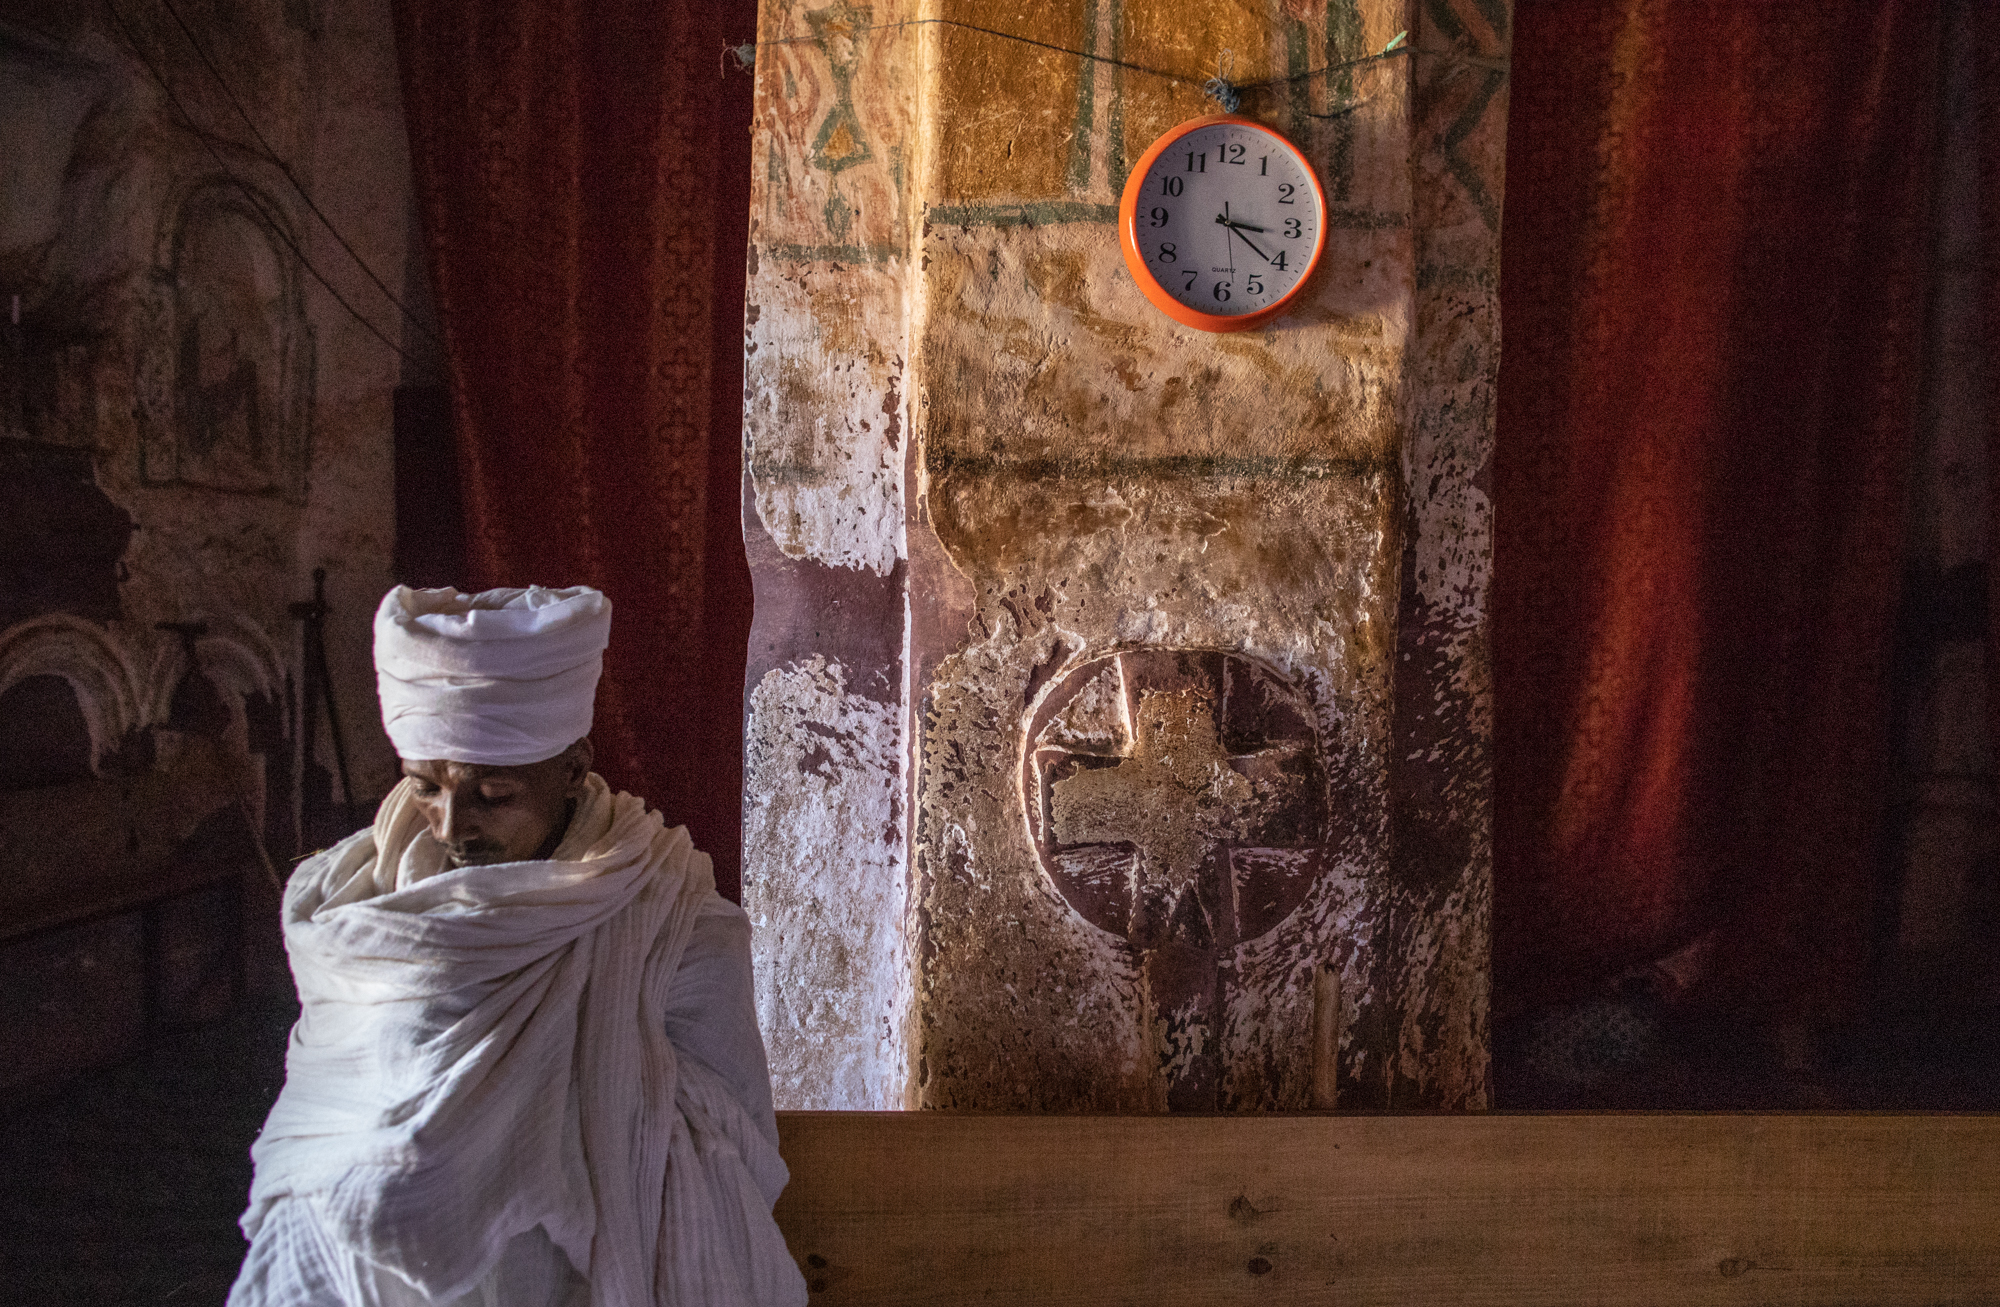   Debra Zion Chruch in Abuna Abraham, Ethiopia -  A priest sitting in the magnificent rock-hewn church known for its architectural features, including decorated dome ceilings, bas-reliefs, and carved crosses on the walls. Access to the church involve